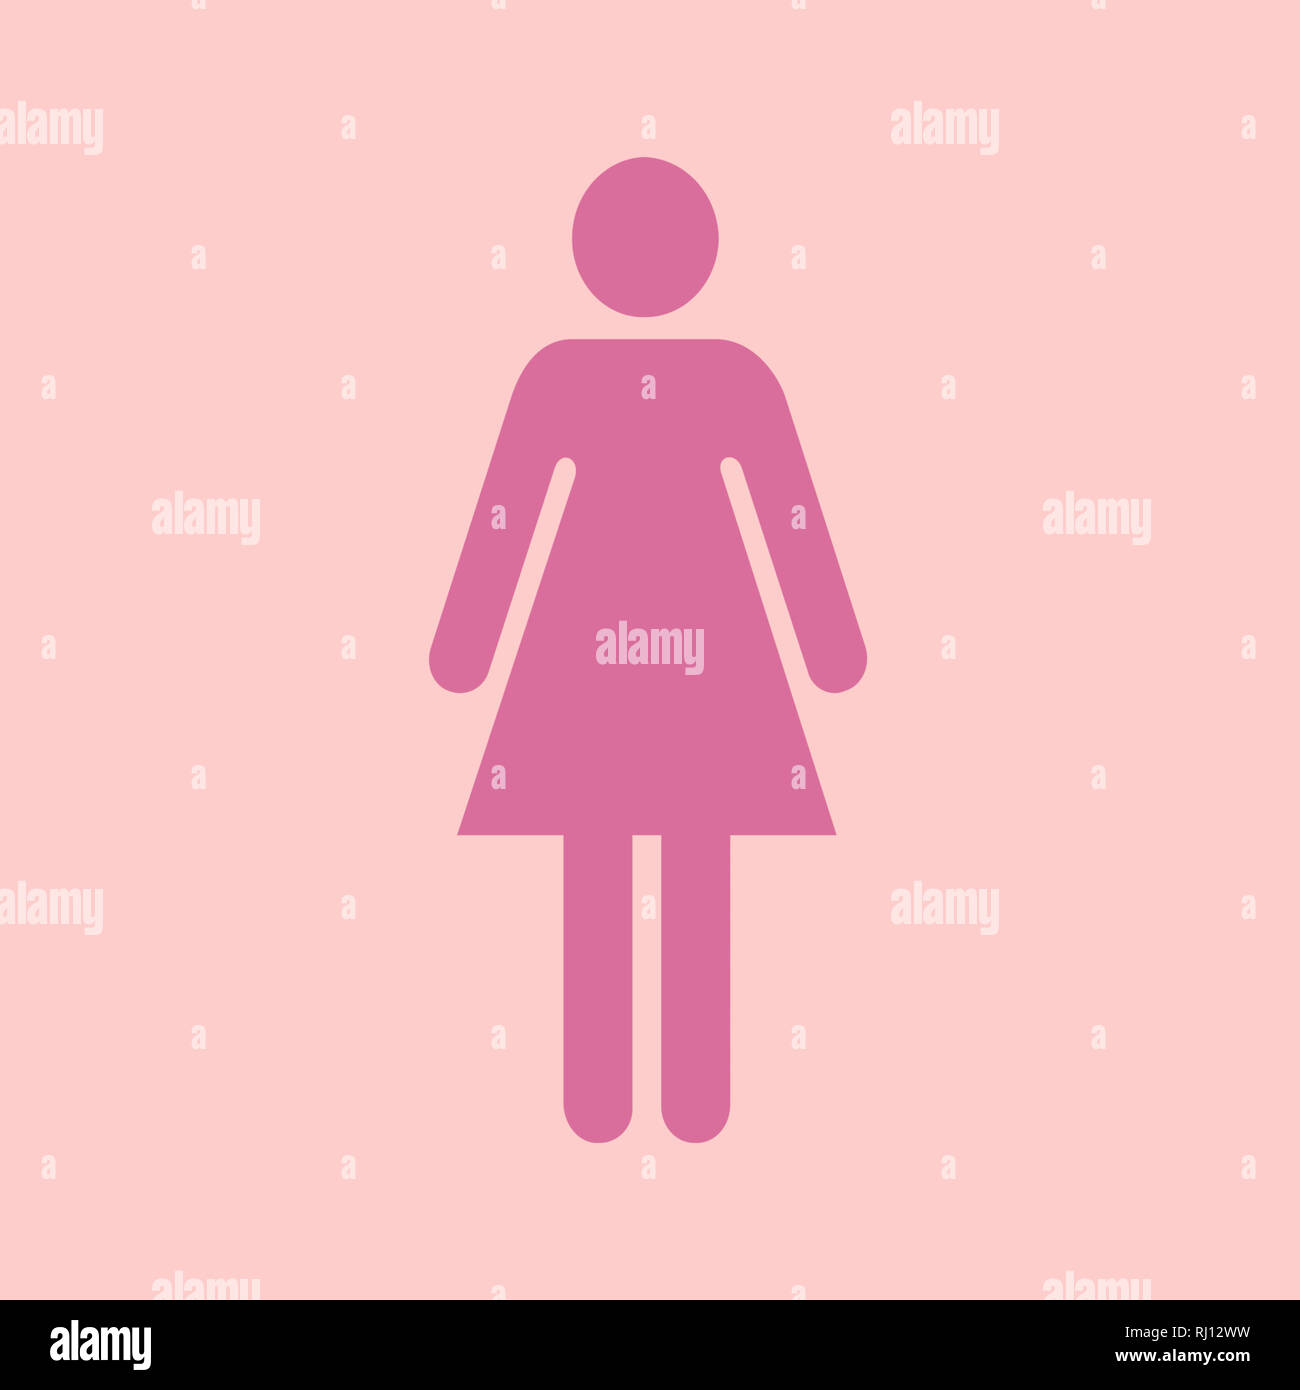 lady woman icon toilet isolated on pink background Stock Photo